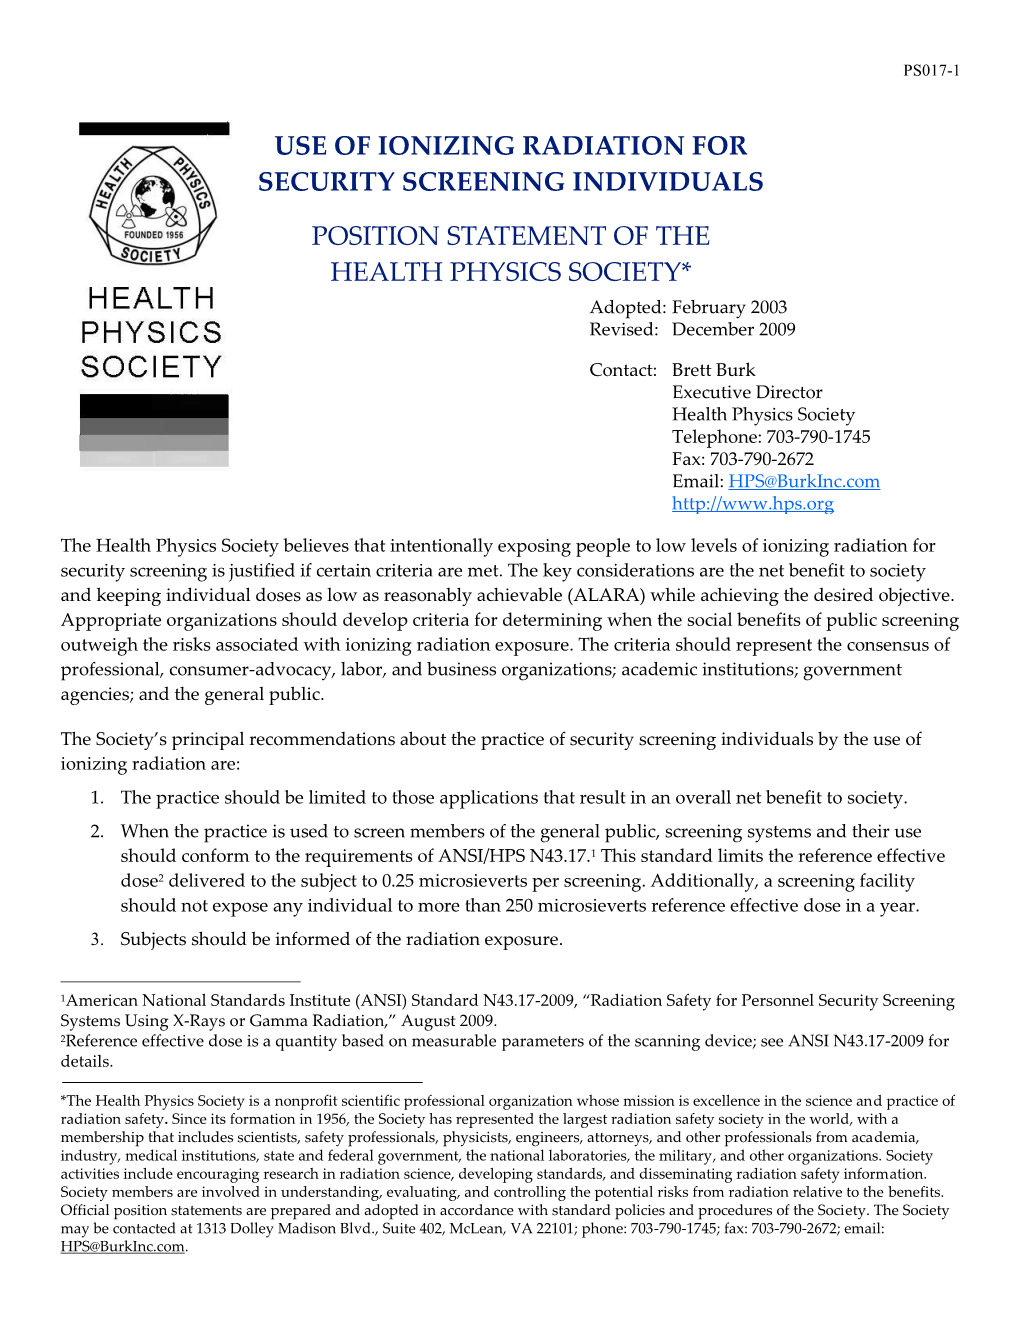 PS017-1 Use of Ionizing Radiation for Security Screening Individuals